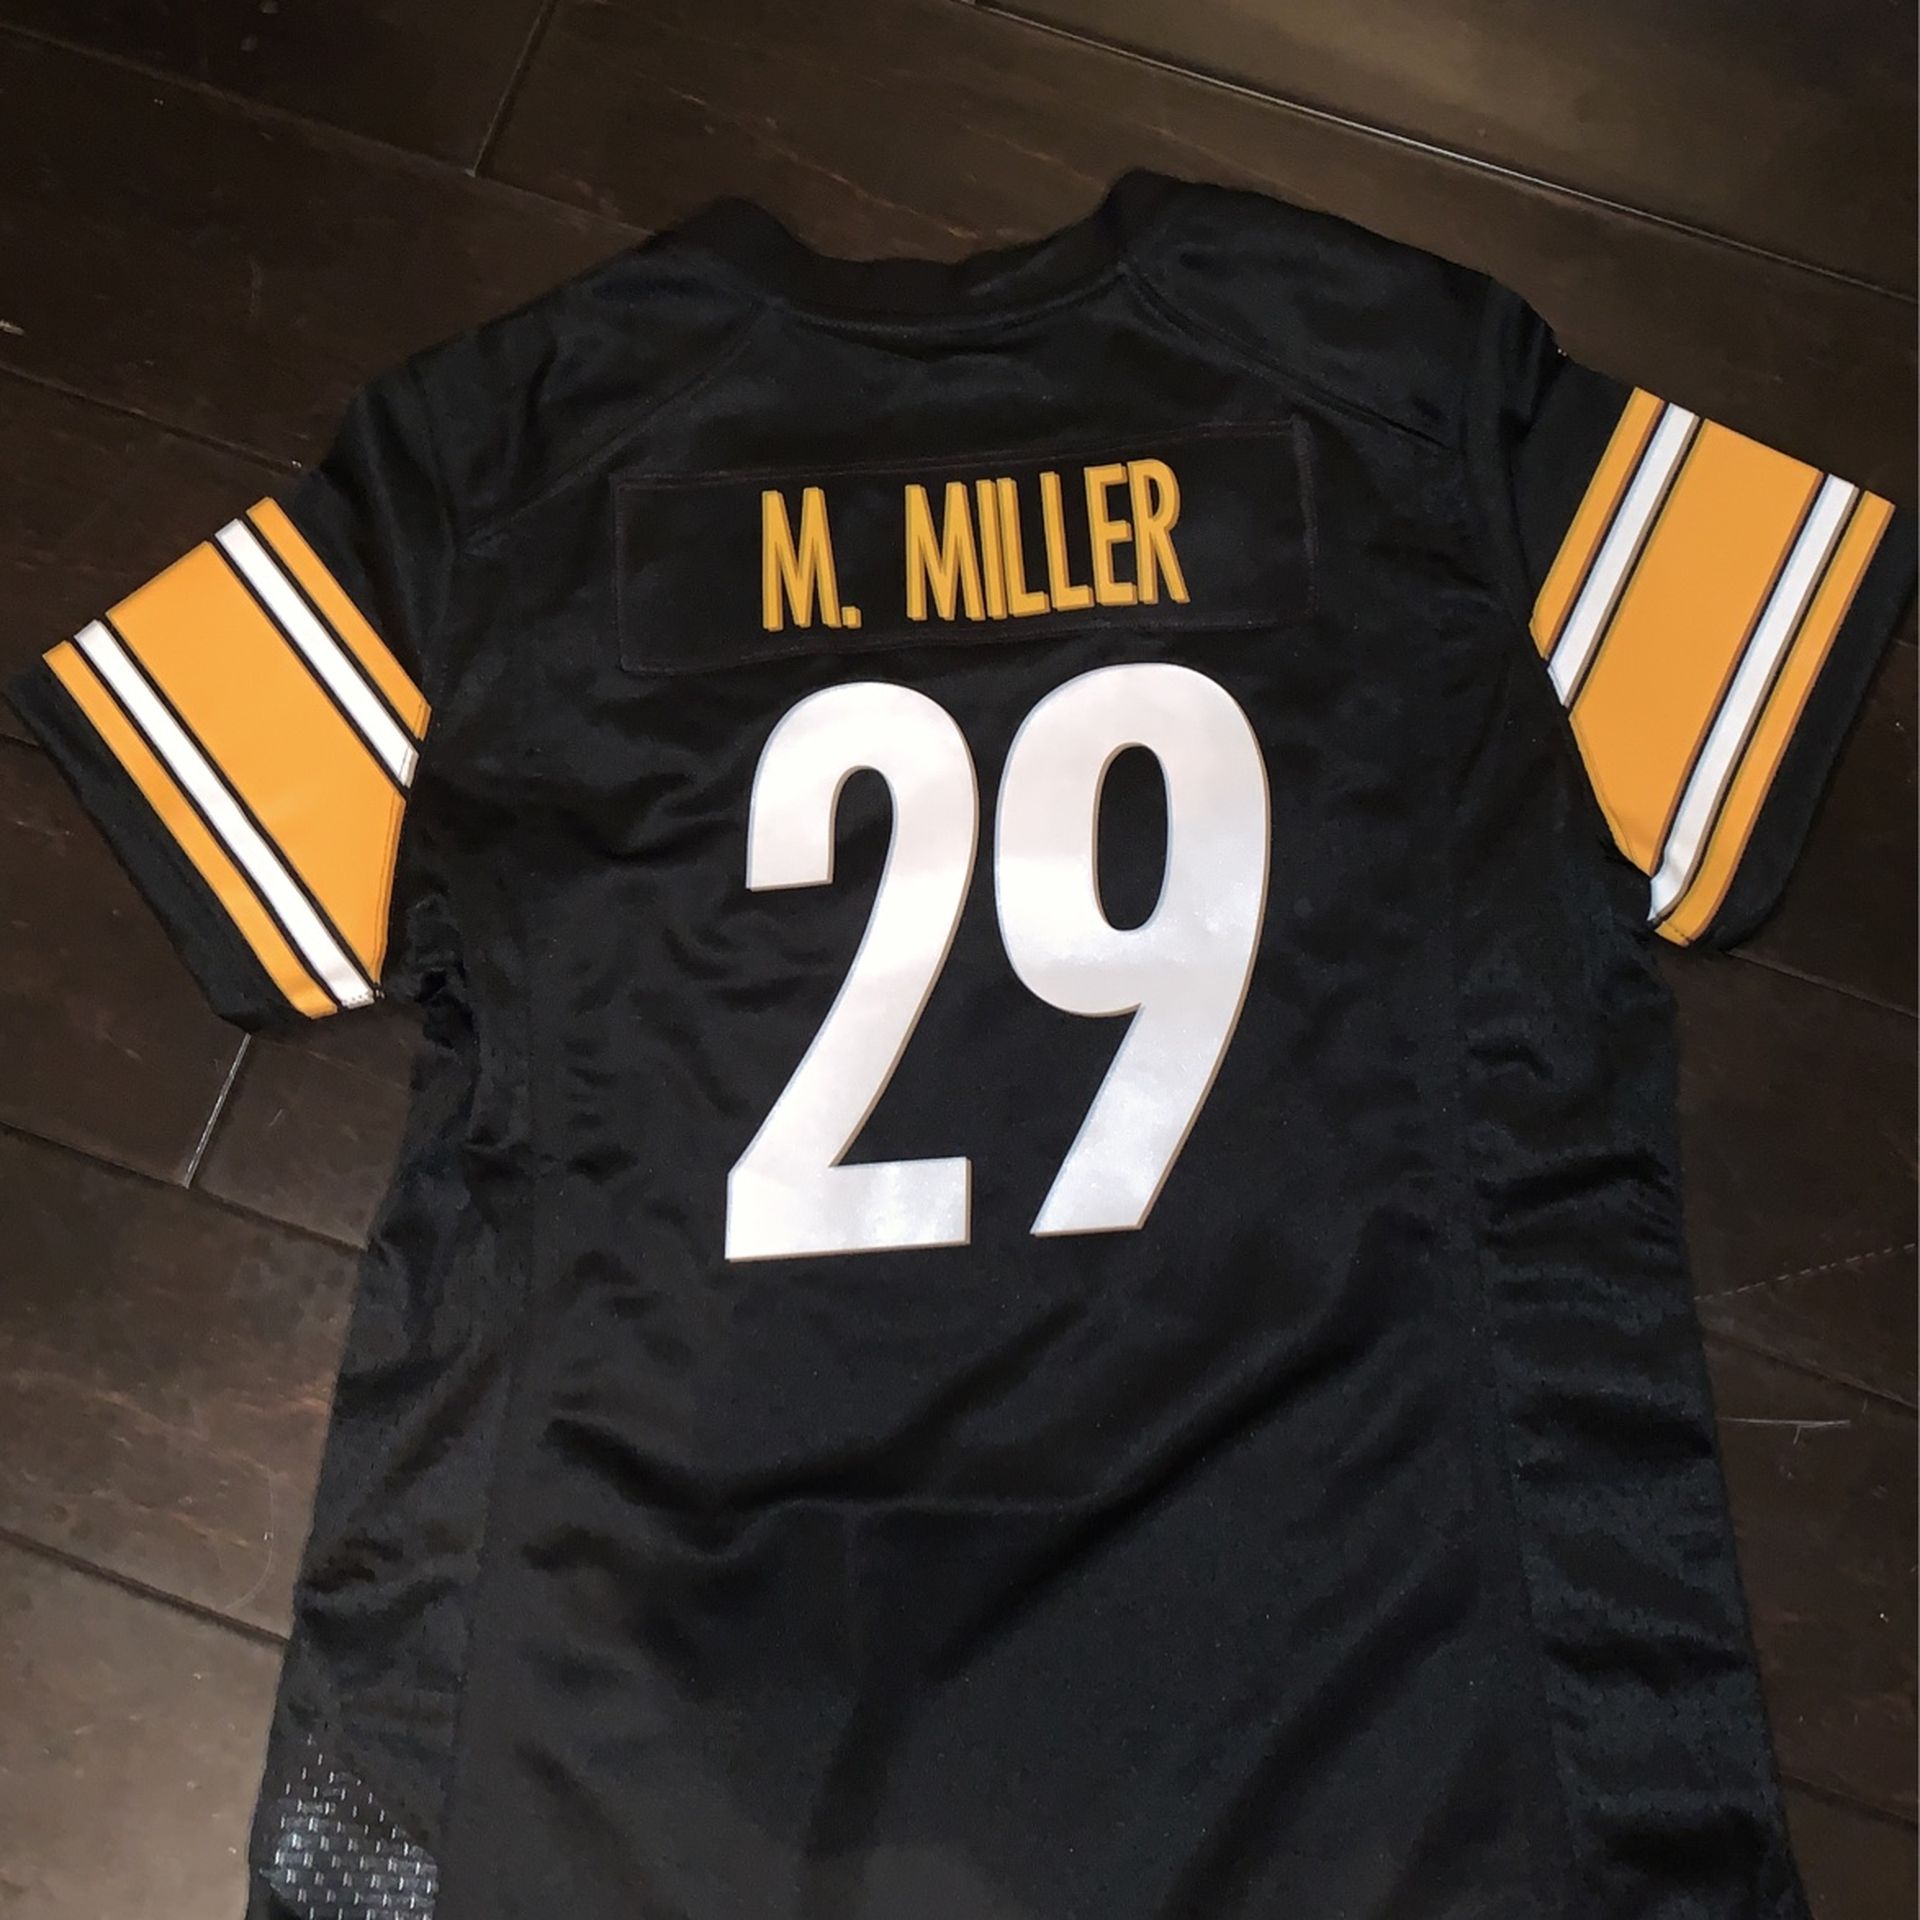 Mac Miller Pittsburg Steelers Jersey for Sale in Tustin, CA - OfferUp